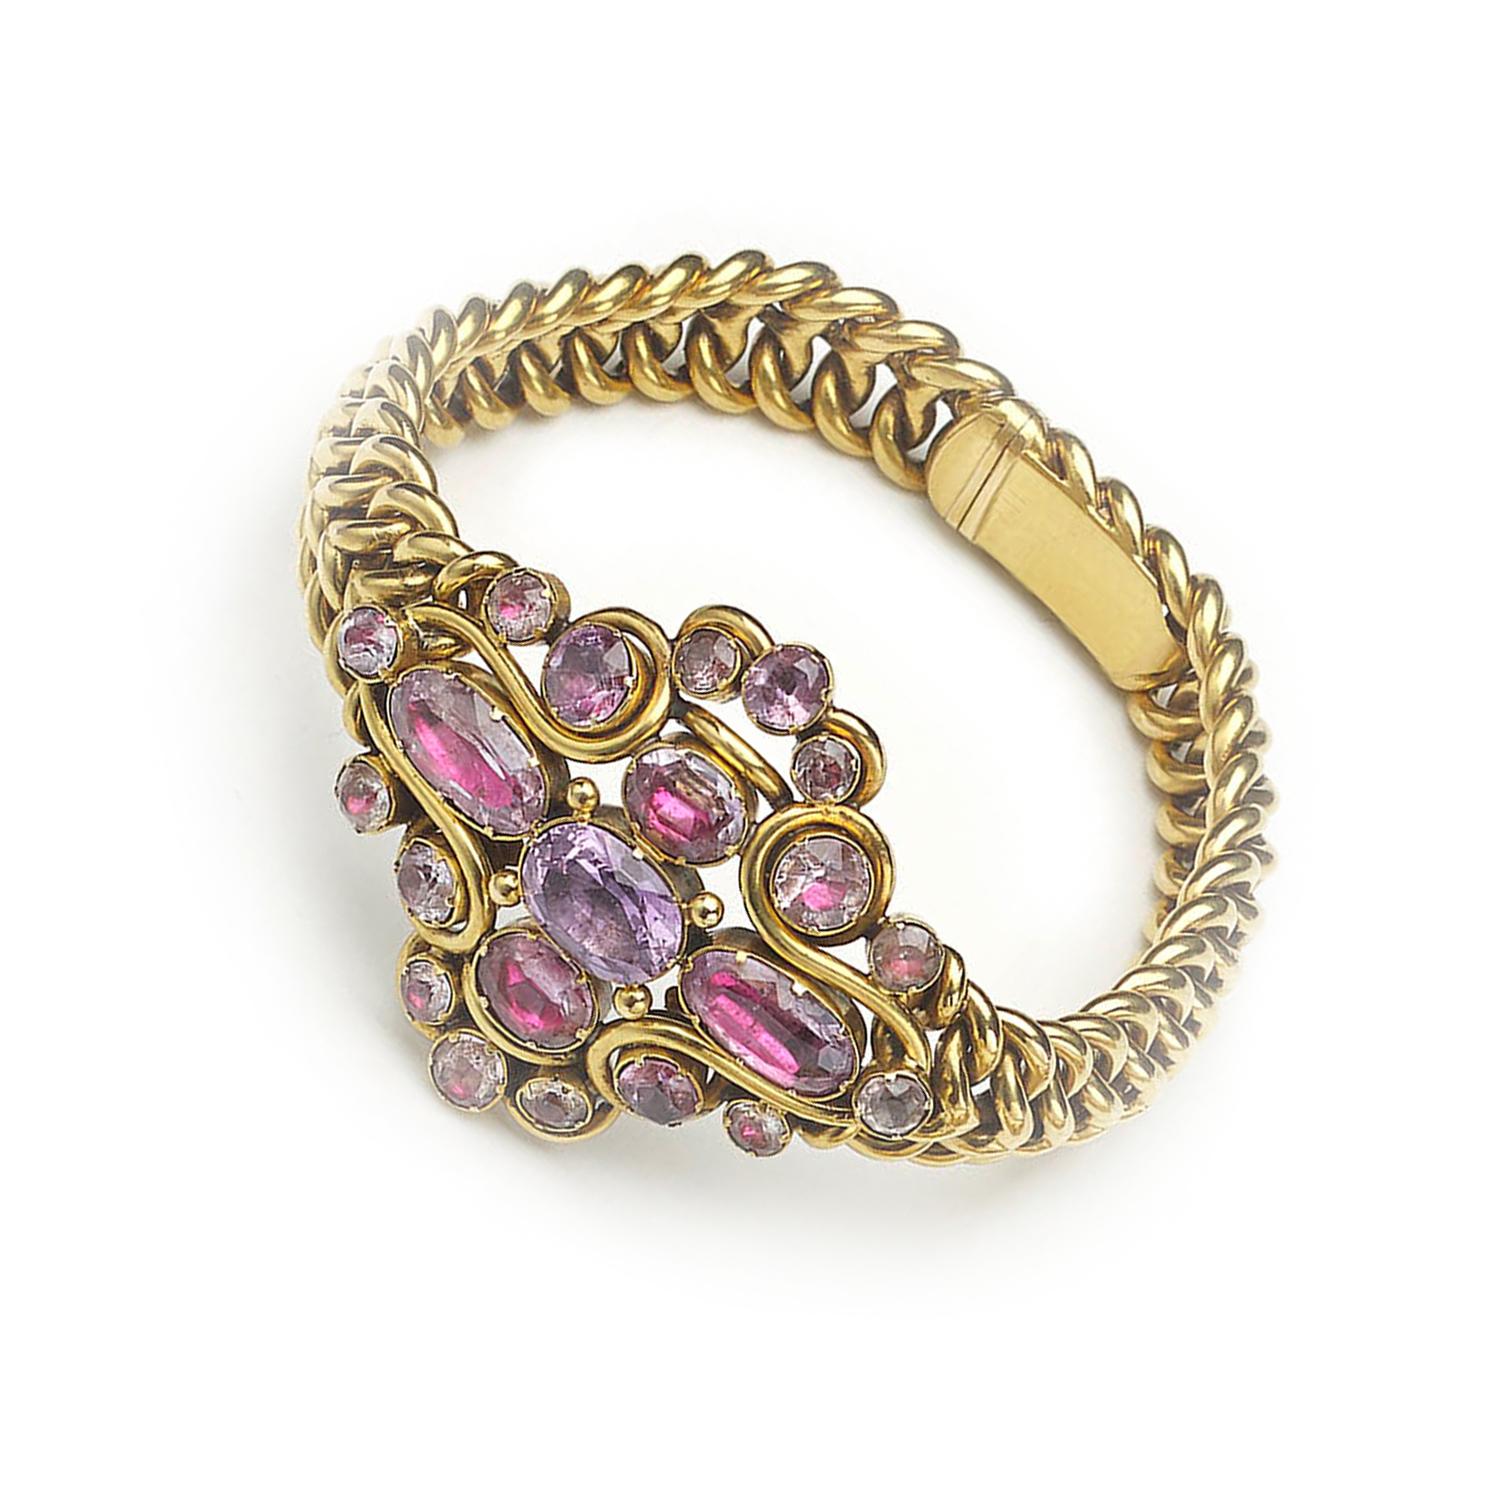 A Georgian pink topaz bracelet, designed as a central cluster of oval-cut and round-cut foil backed pink topaz, in closed back settings, on an integrated heavy woven gold bracelet, with a tongue and box clasp, circa 1835.